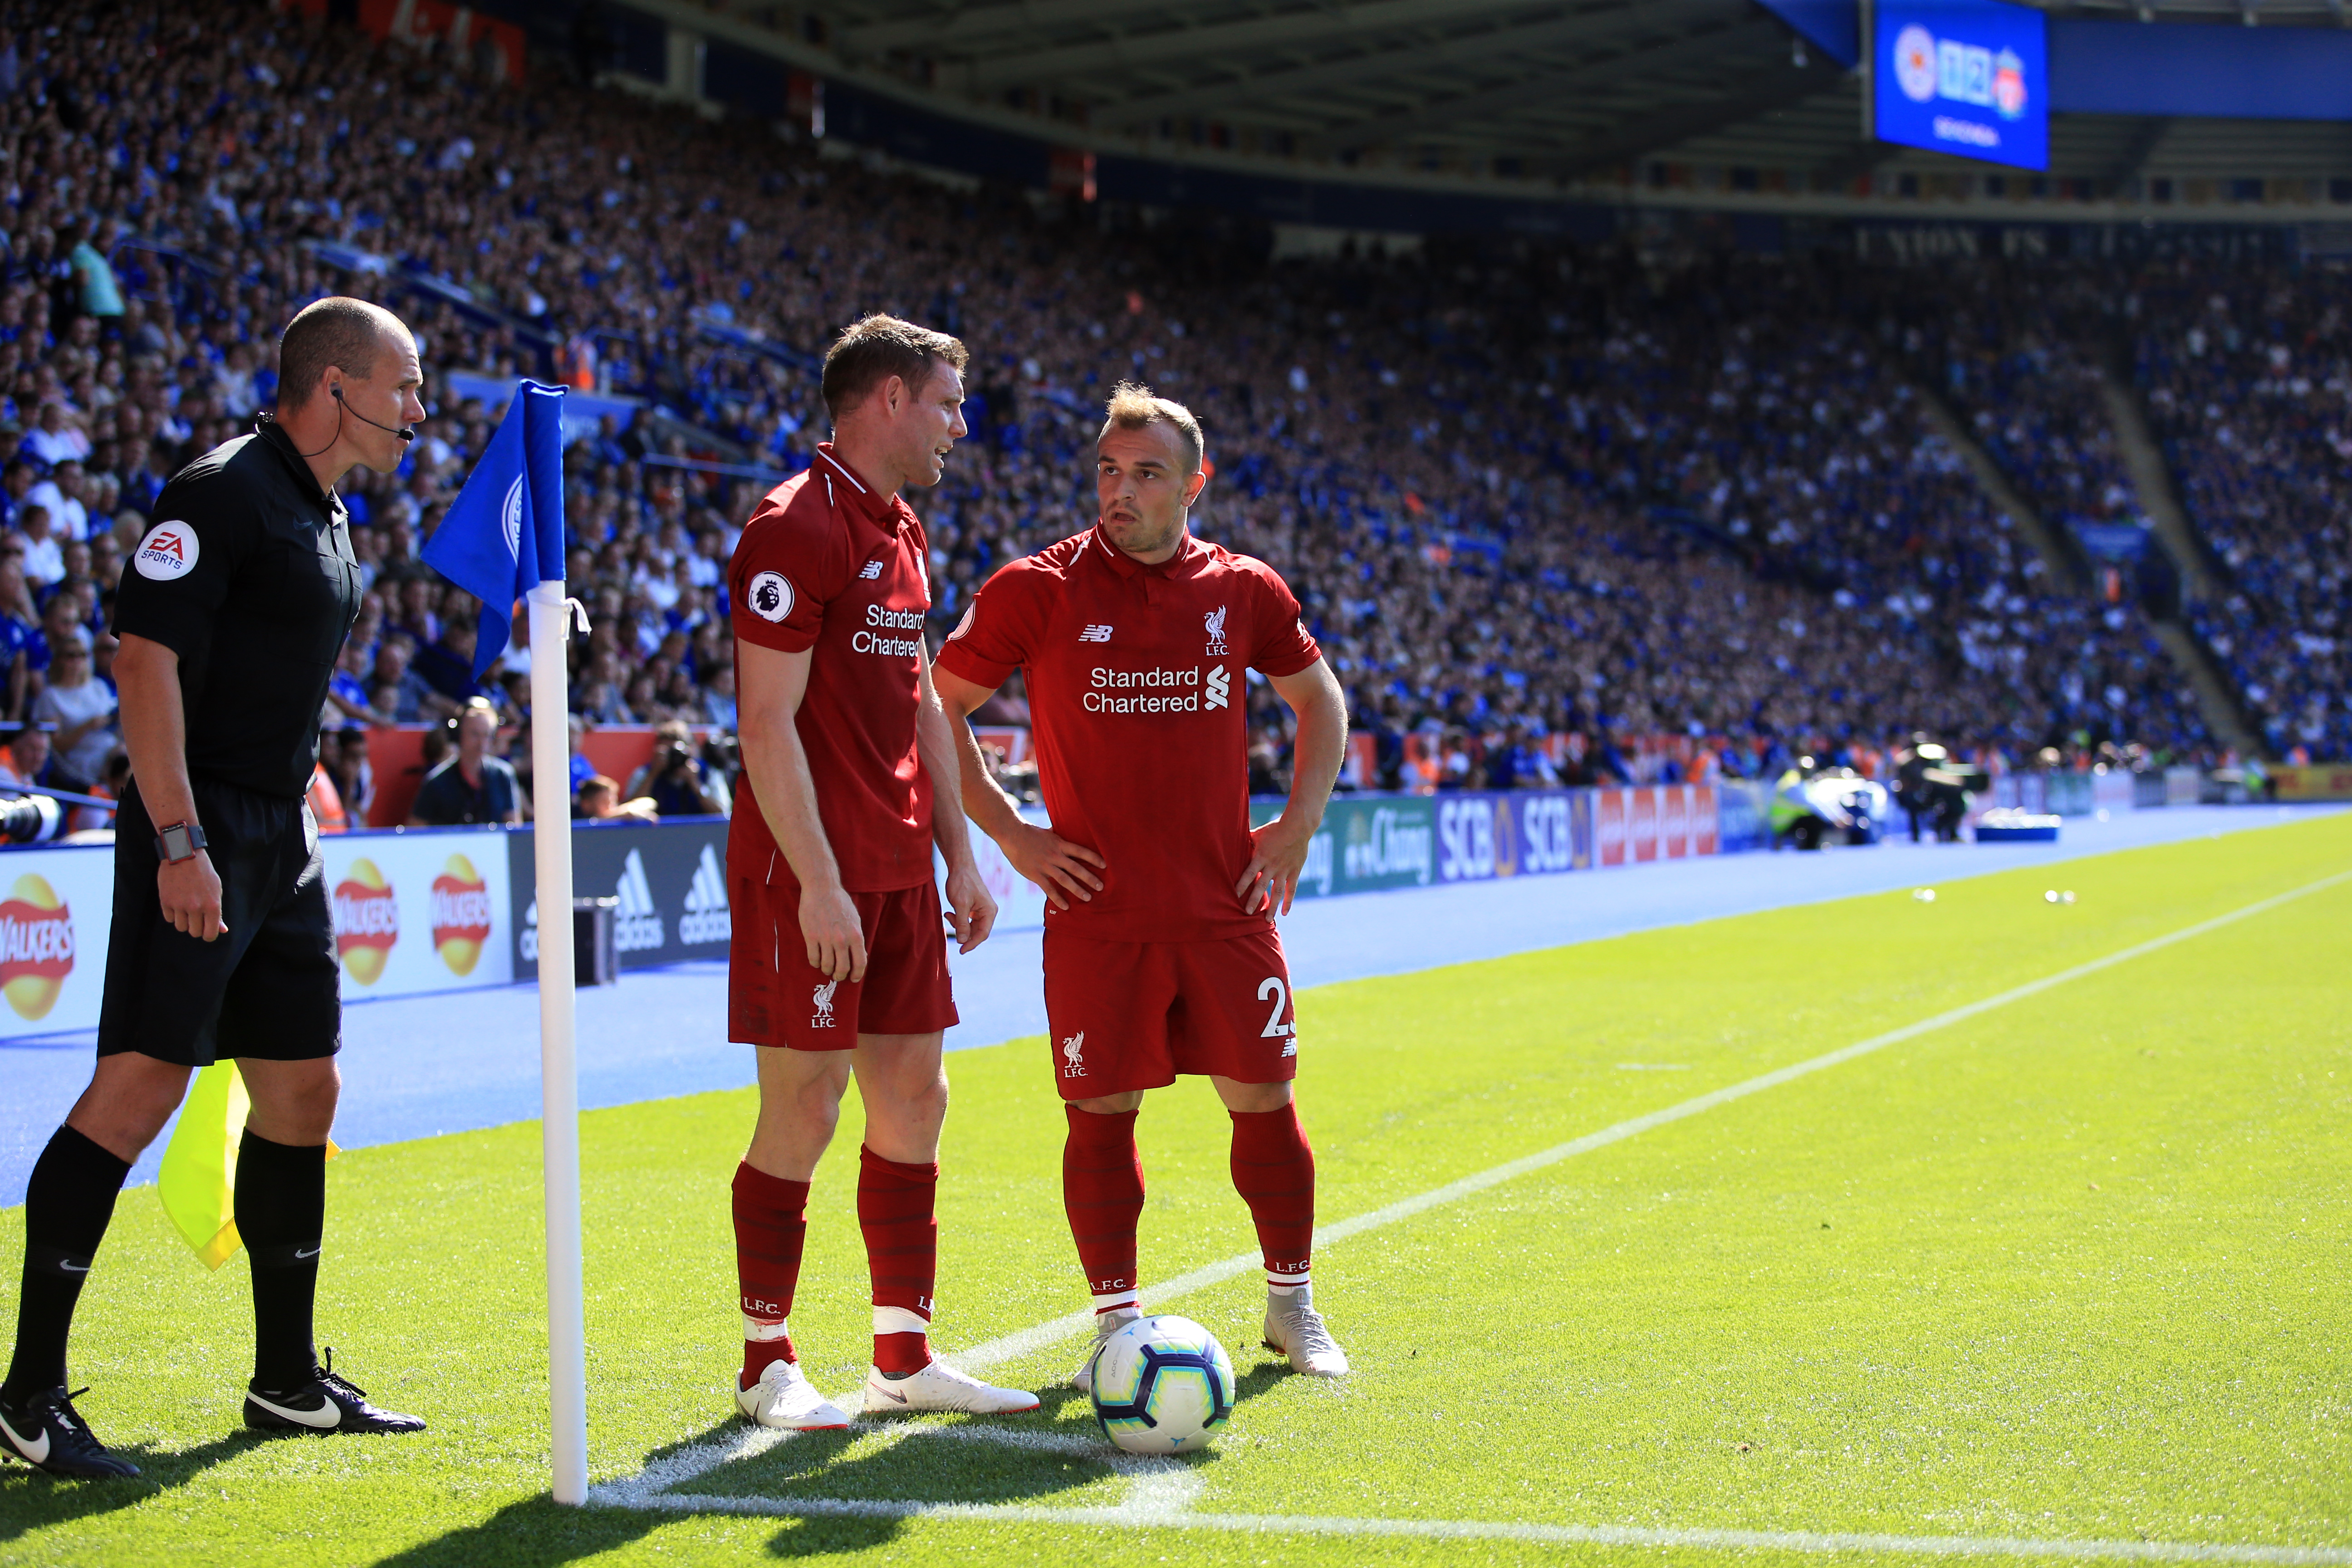 LEICESTER, ENGLAND - SEPTEMBER 01:  Xherdan Shaqiri and James Milner of Liverpool in discussion over a corner as the linesman looks on during the Premier League match between Leicester City and Liverpool FC at The King Power Stadium on September 1, 2018 in Leicester, United Kingdom. (Photo by Marc Atkins/Getty Images)